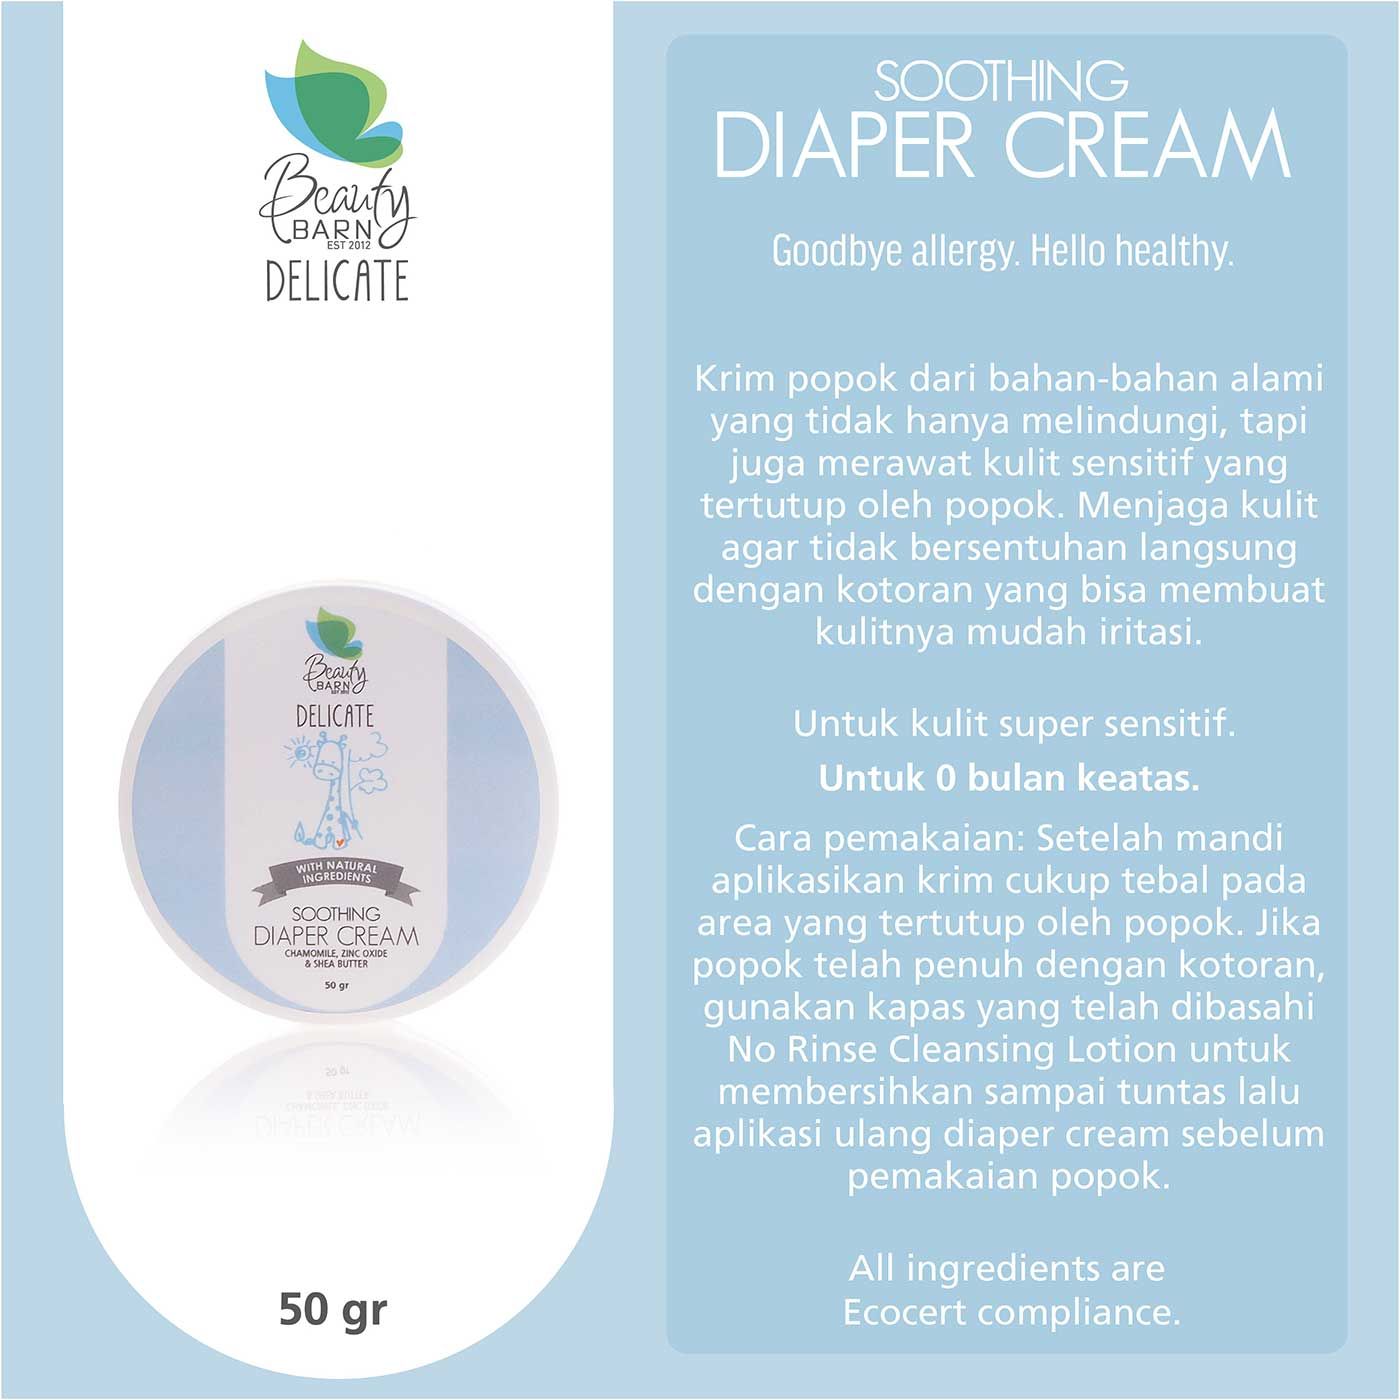 Beauty Barn Delicate - Soothing Diaper Cream 50g - 3